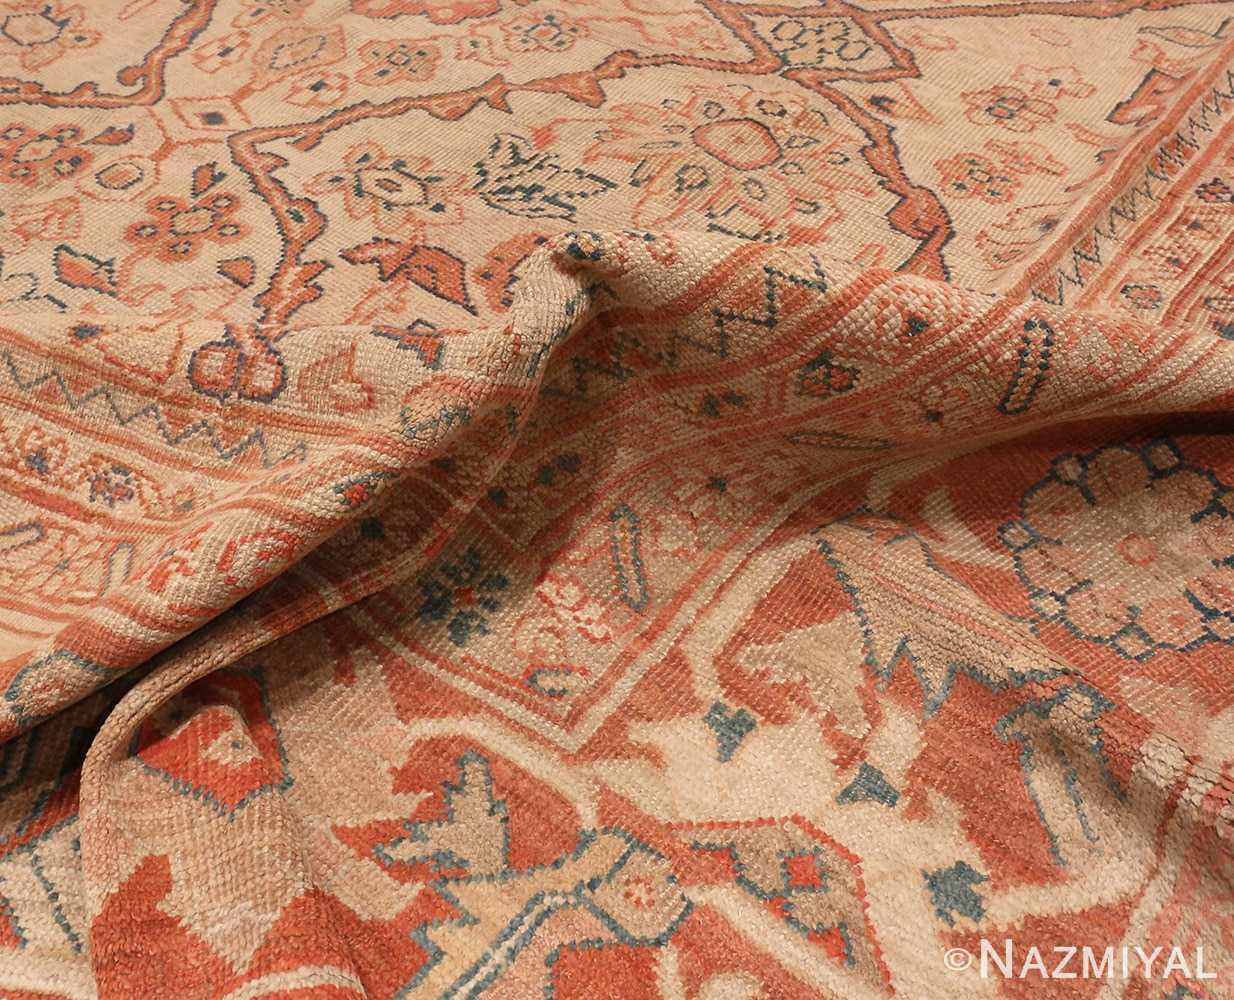 A picture of the pile of Antique Ivory Persian Sultanabad rug #50576 from Nazmiyal Antique Rugs in NYC